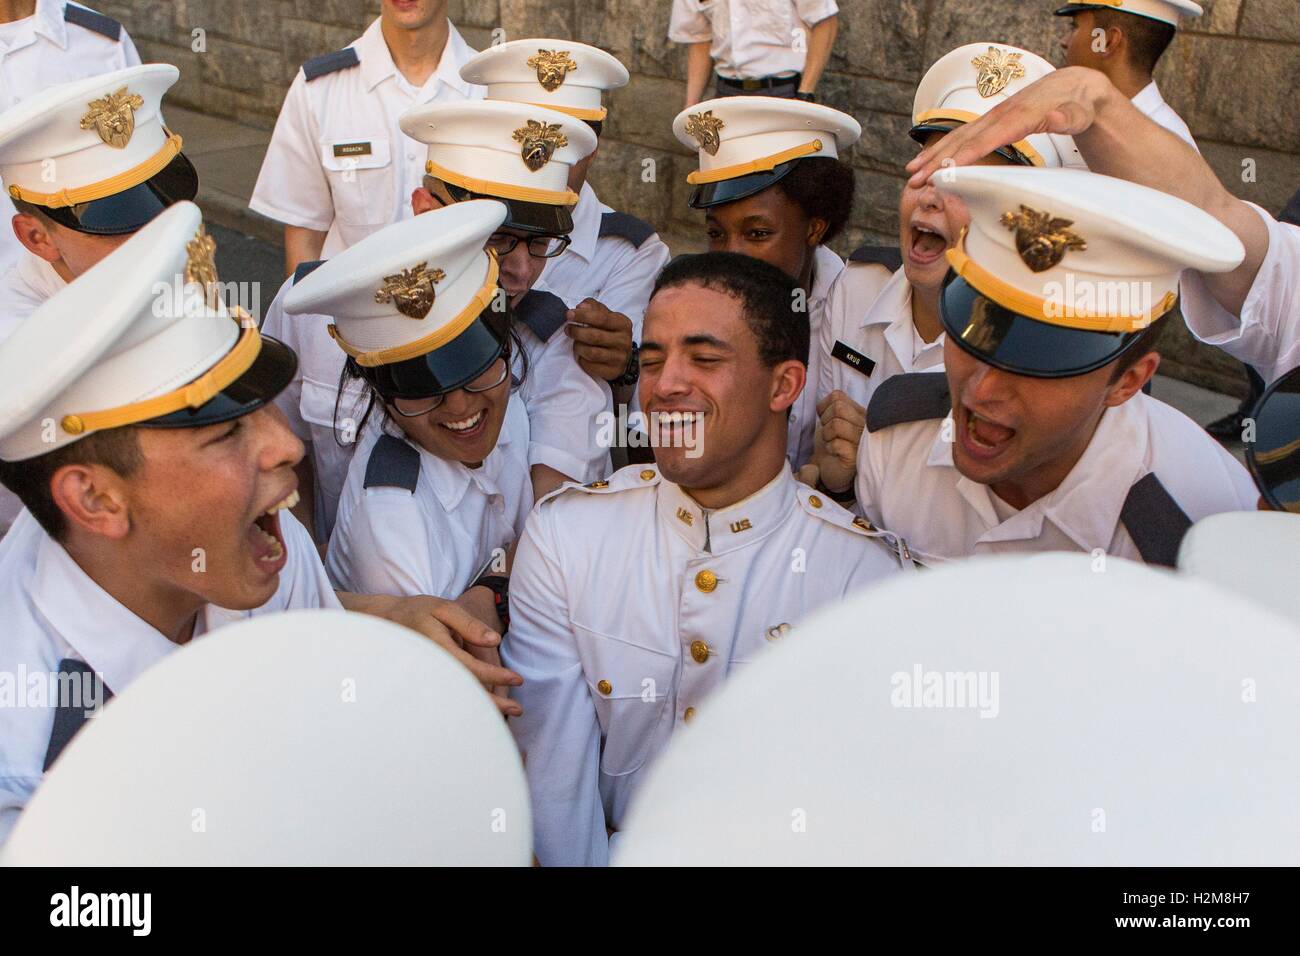 A U.S. Military Academy Class of 2017 senior students celebrate after the annual Ring Ceremony at Trophy Point August 26, 2016 in West Point, New York. Stock Photo